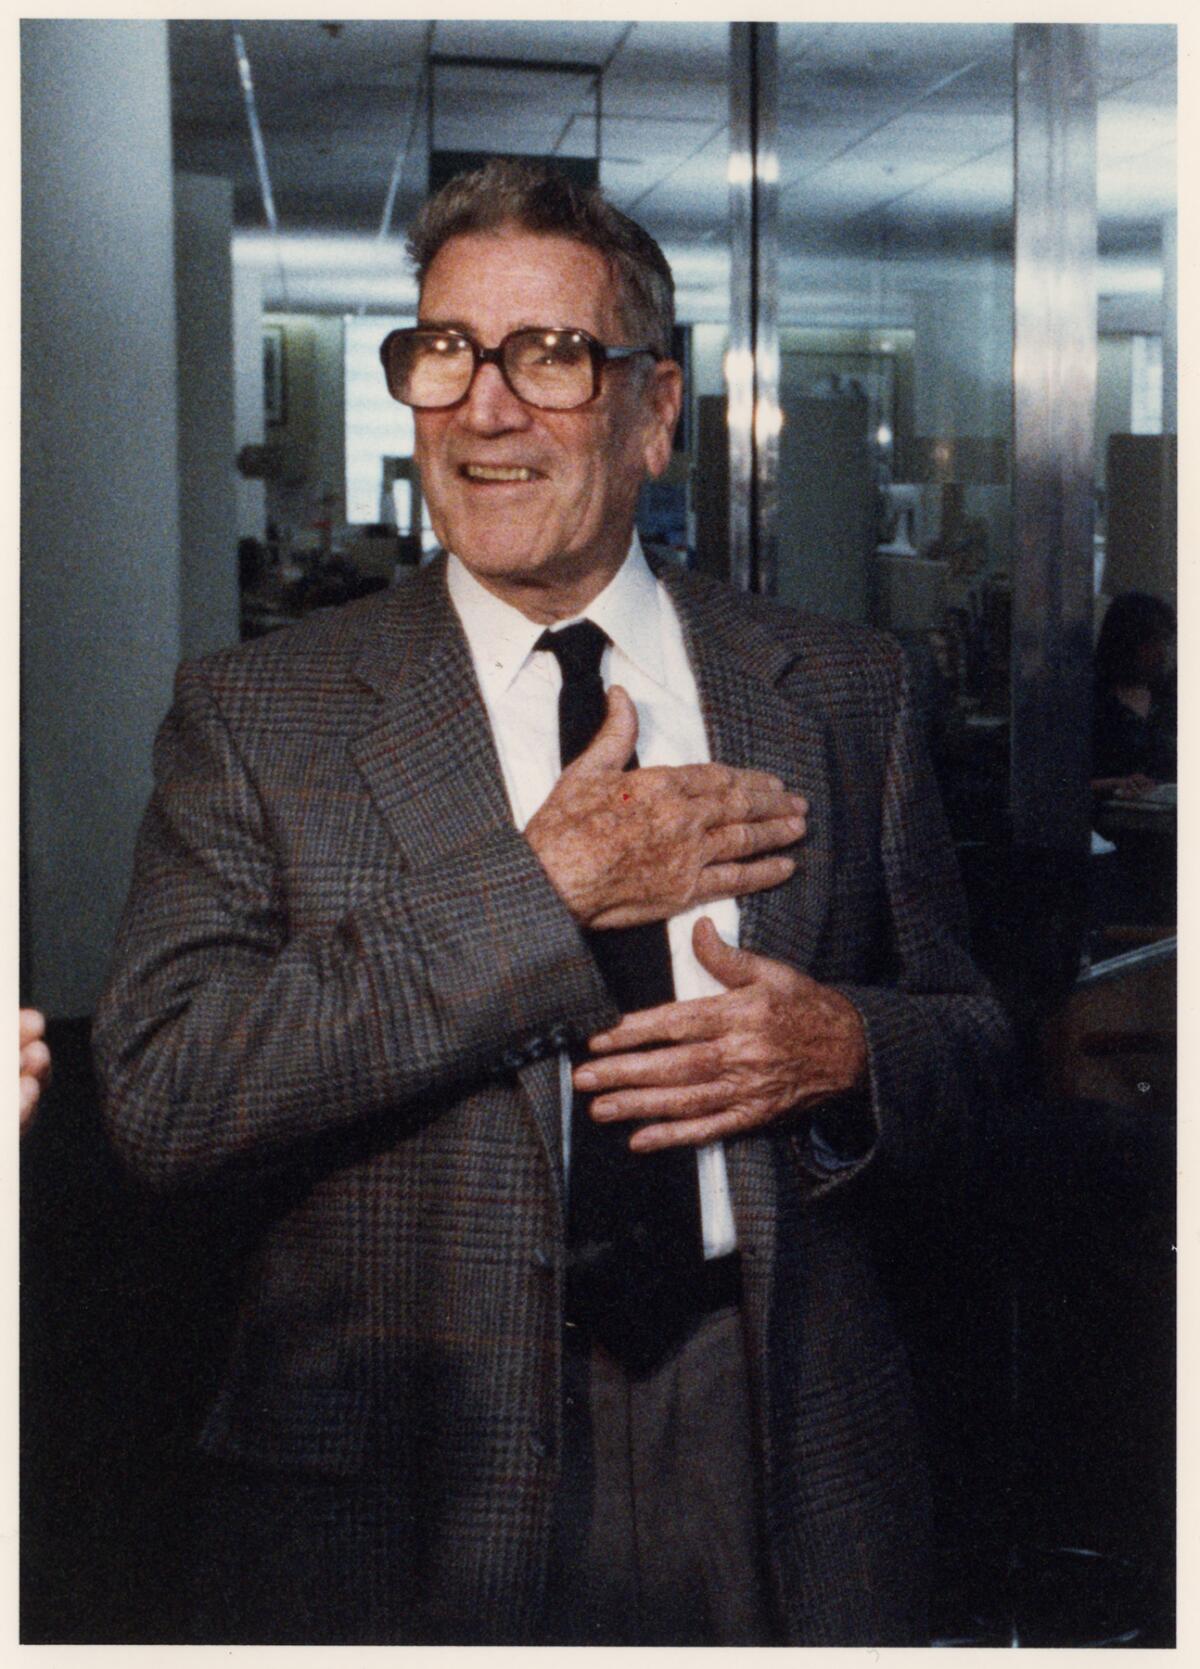 Jim Murray wearing a jacket and tie and signature thick-framed glasses.